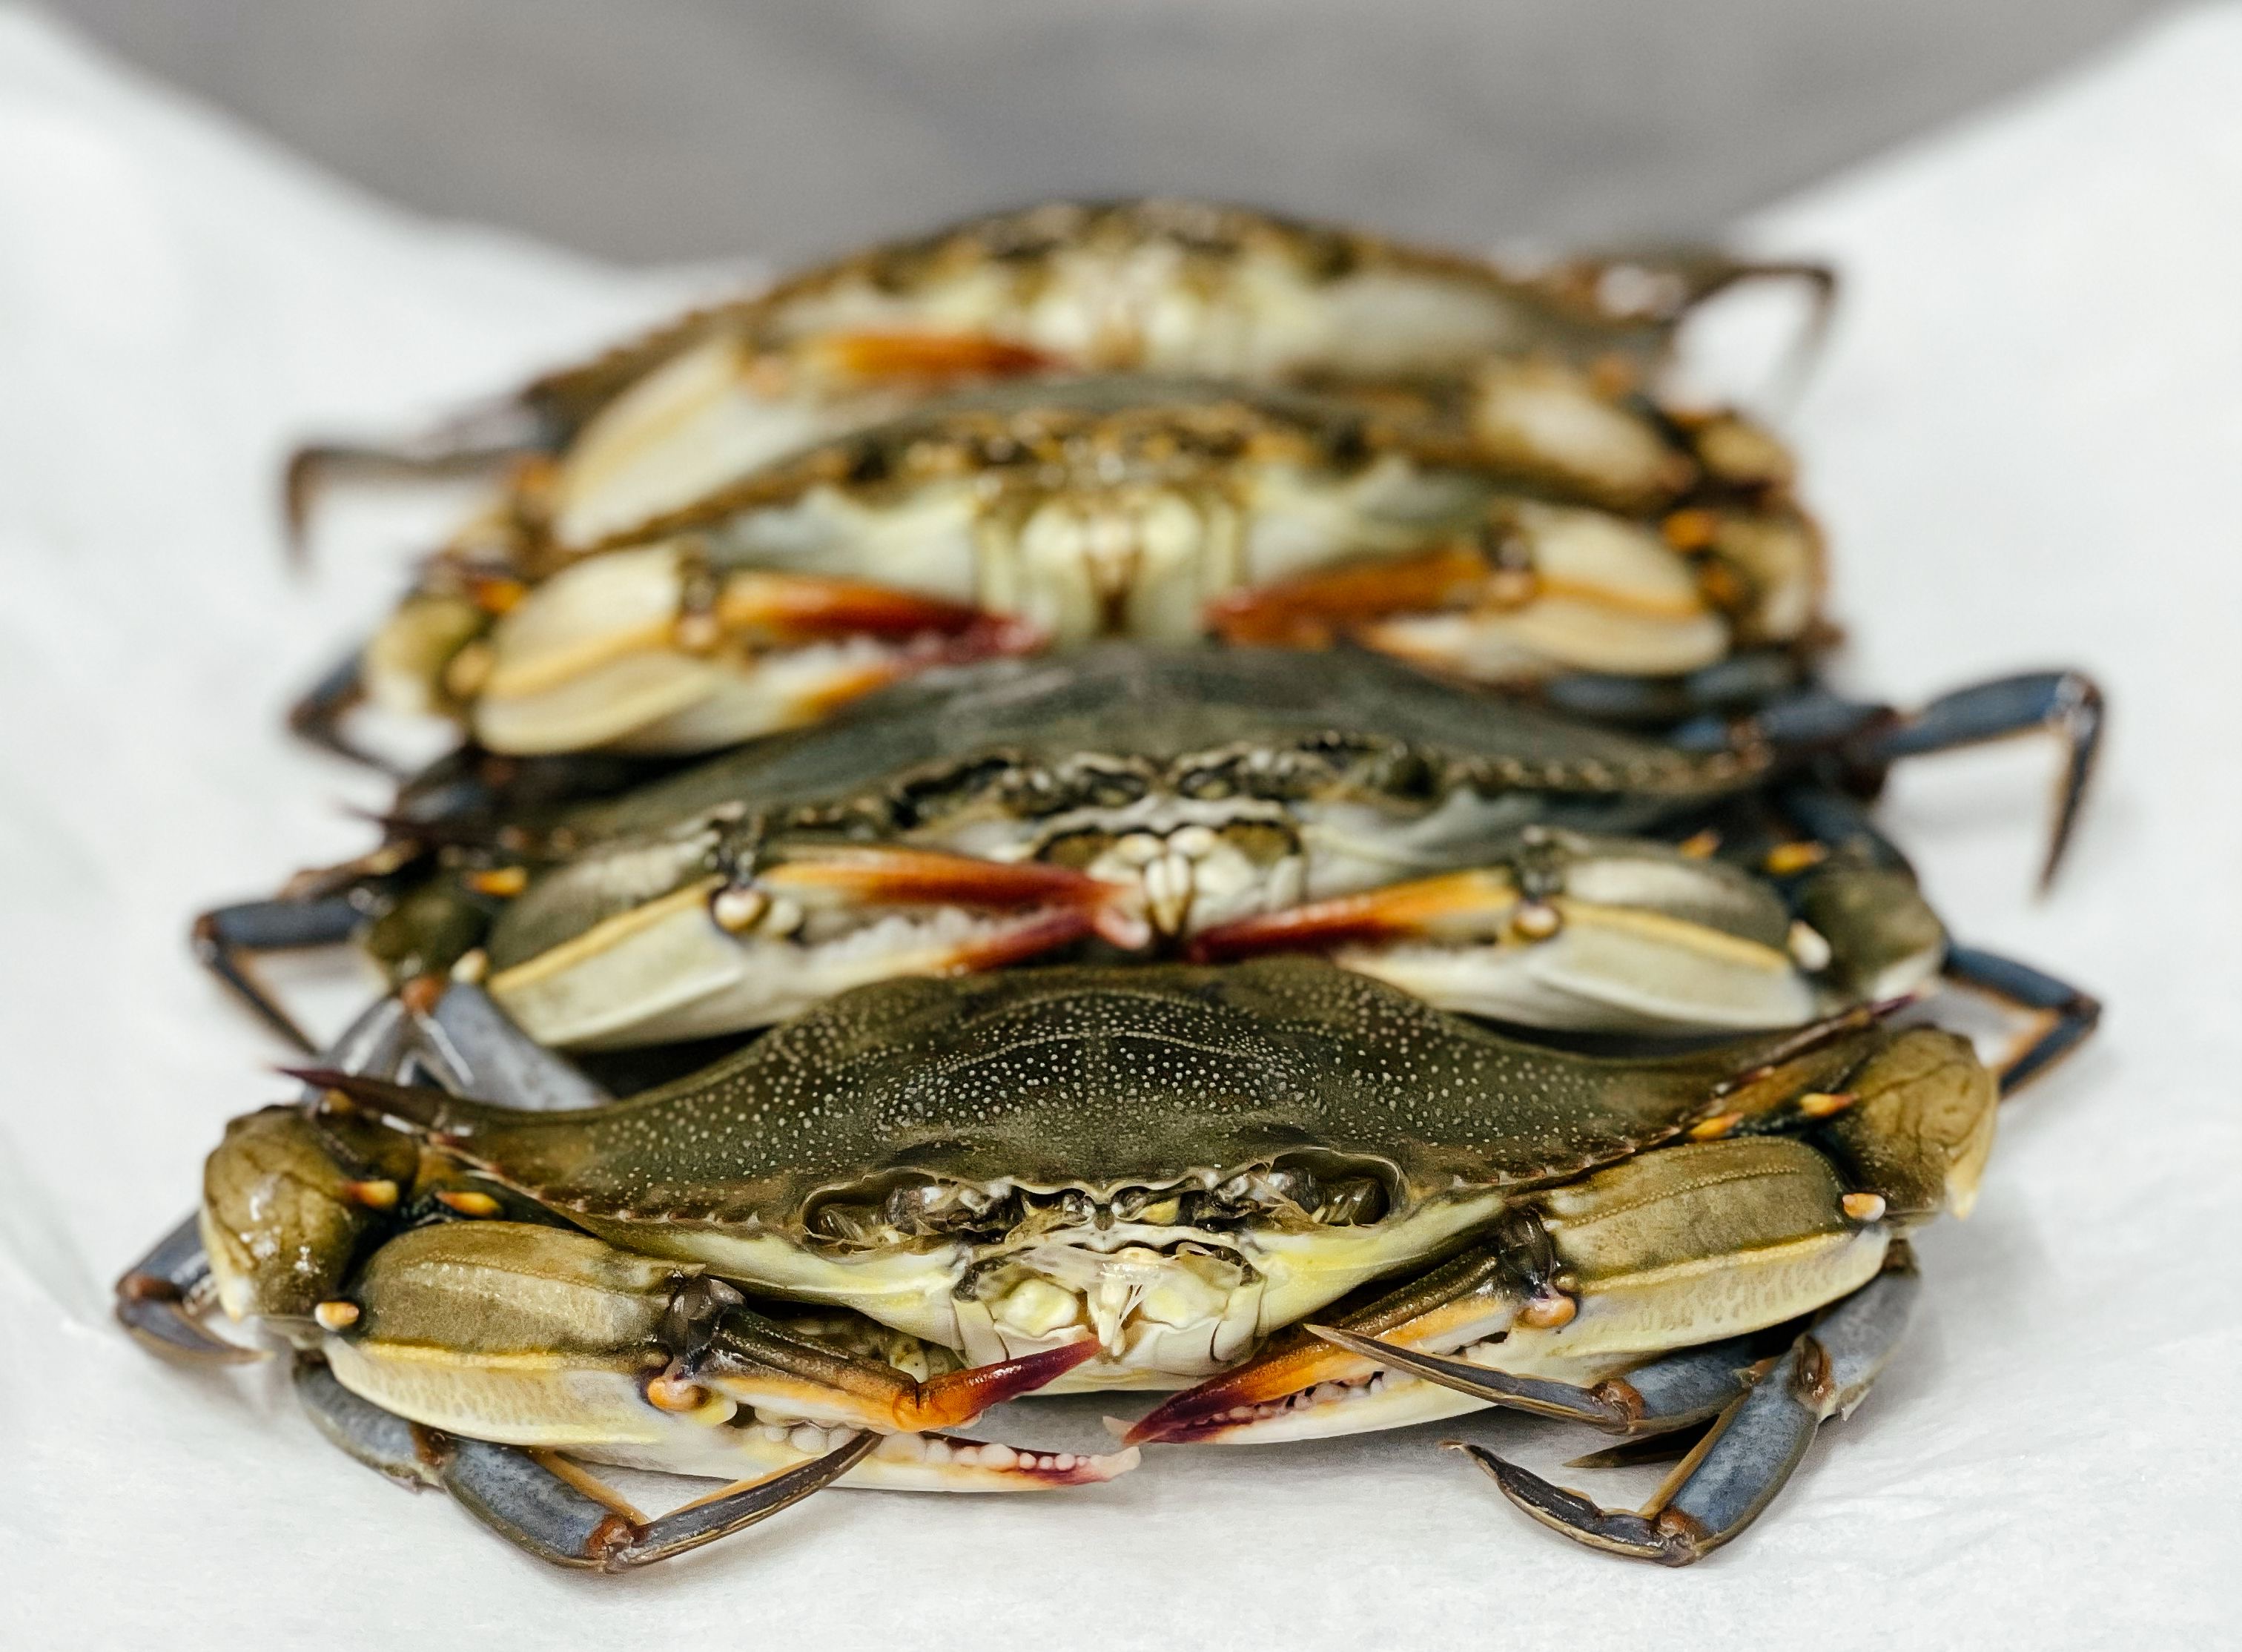 BEST East .Coast CRAB CATCHER 15X12 BLUE & Shell CRABS .* Free Shipping 